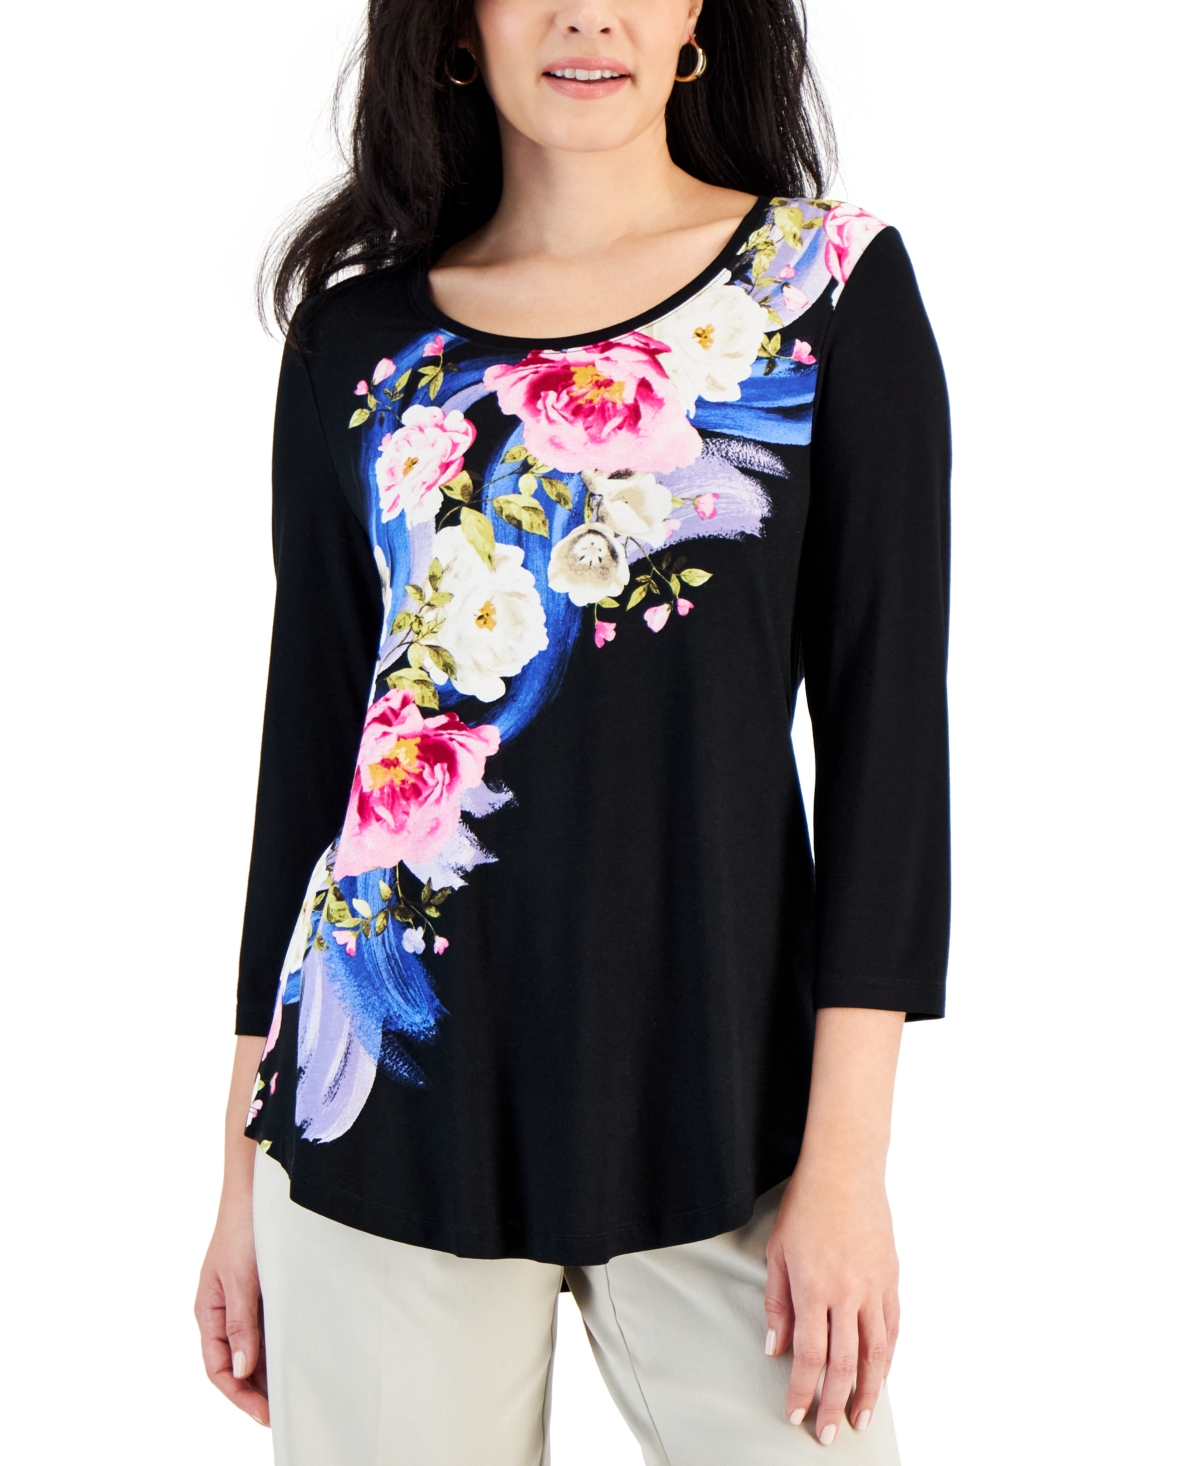 JM Collection Printed 3/4-Sleeve Top, Created for Macy's - Macy's